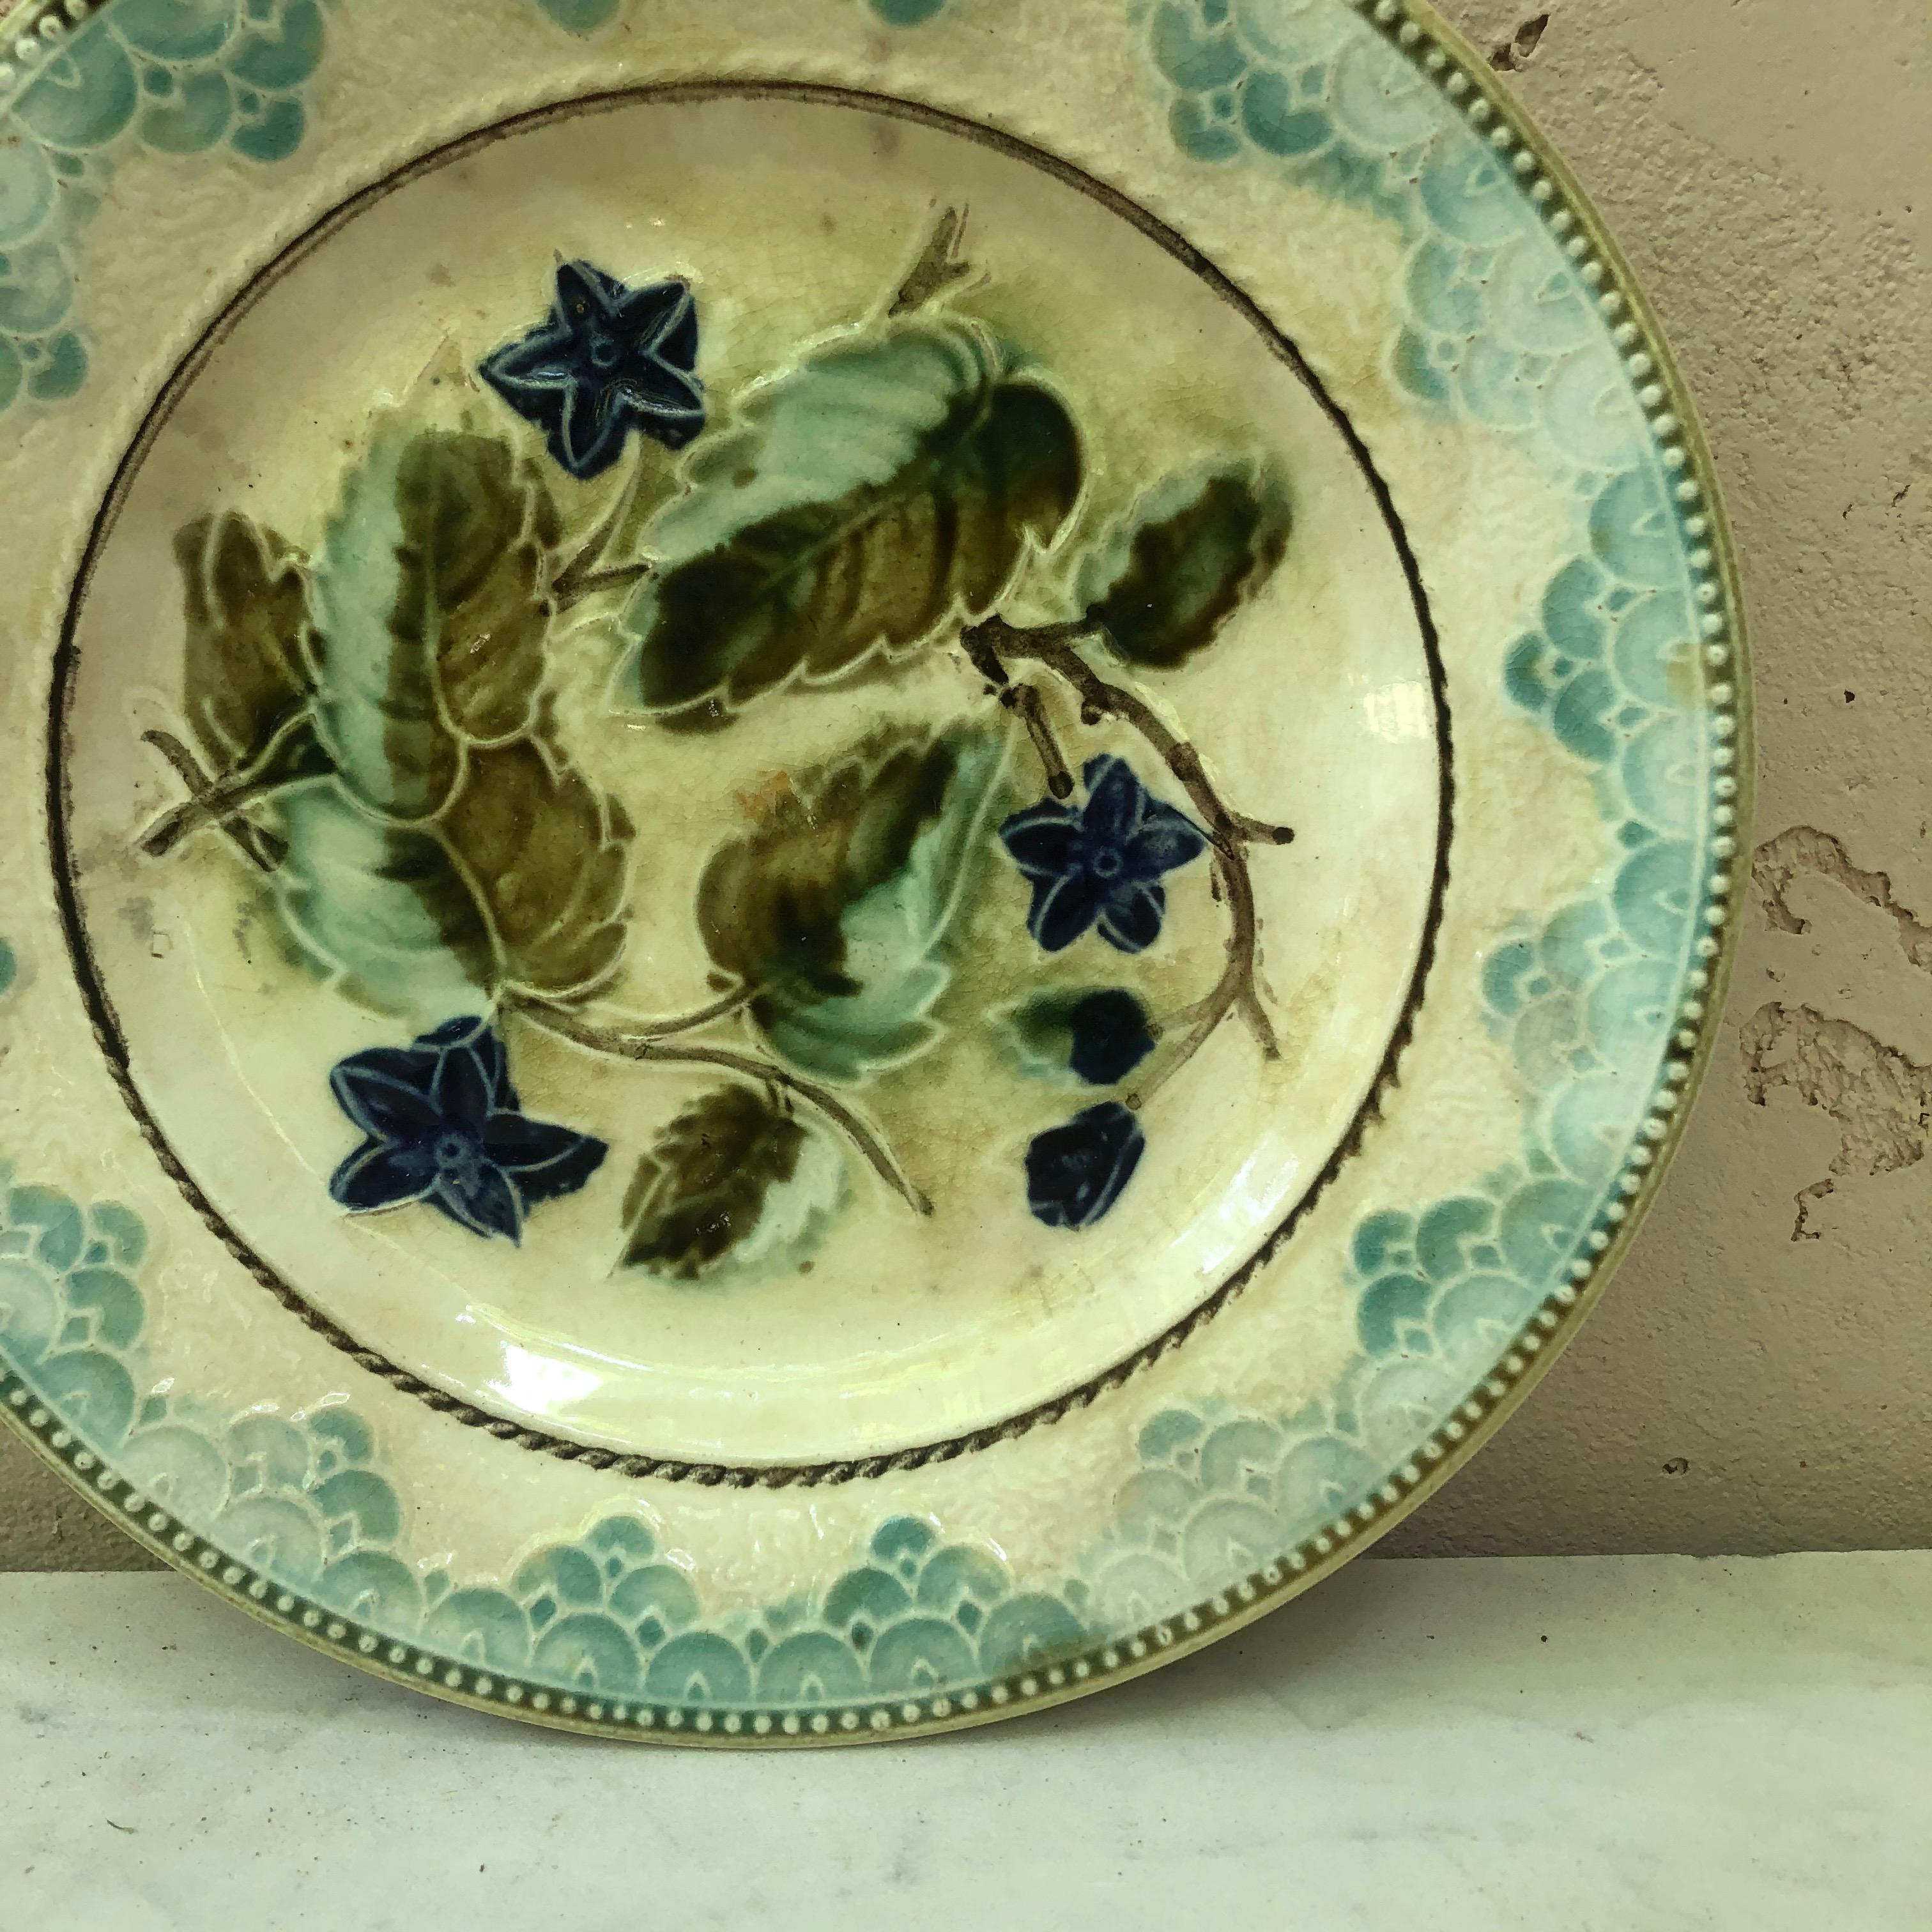 Majolica plate with blue flowers and leaves, circa 1890 attributed to Onnaing.